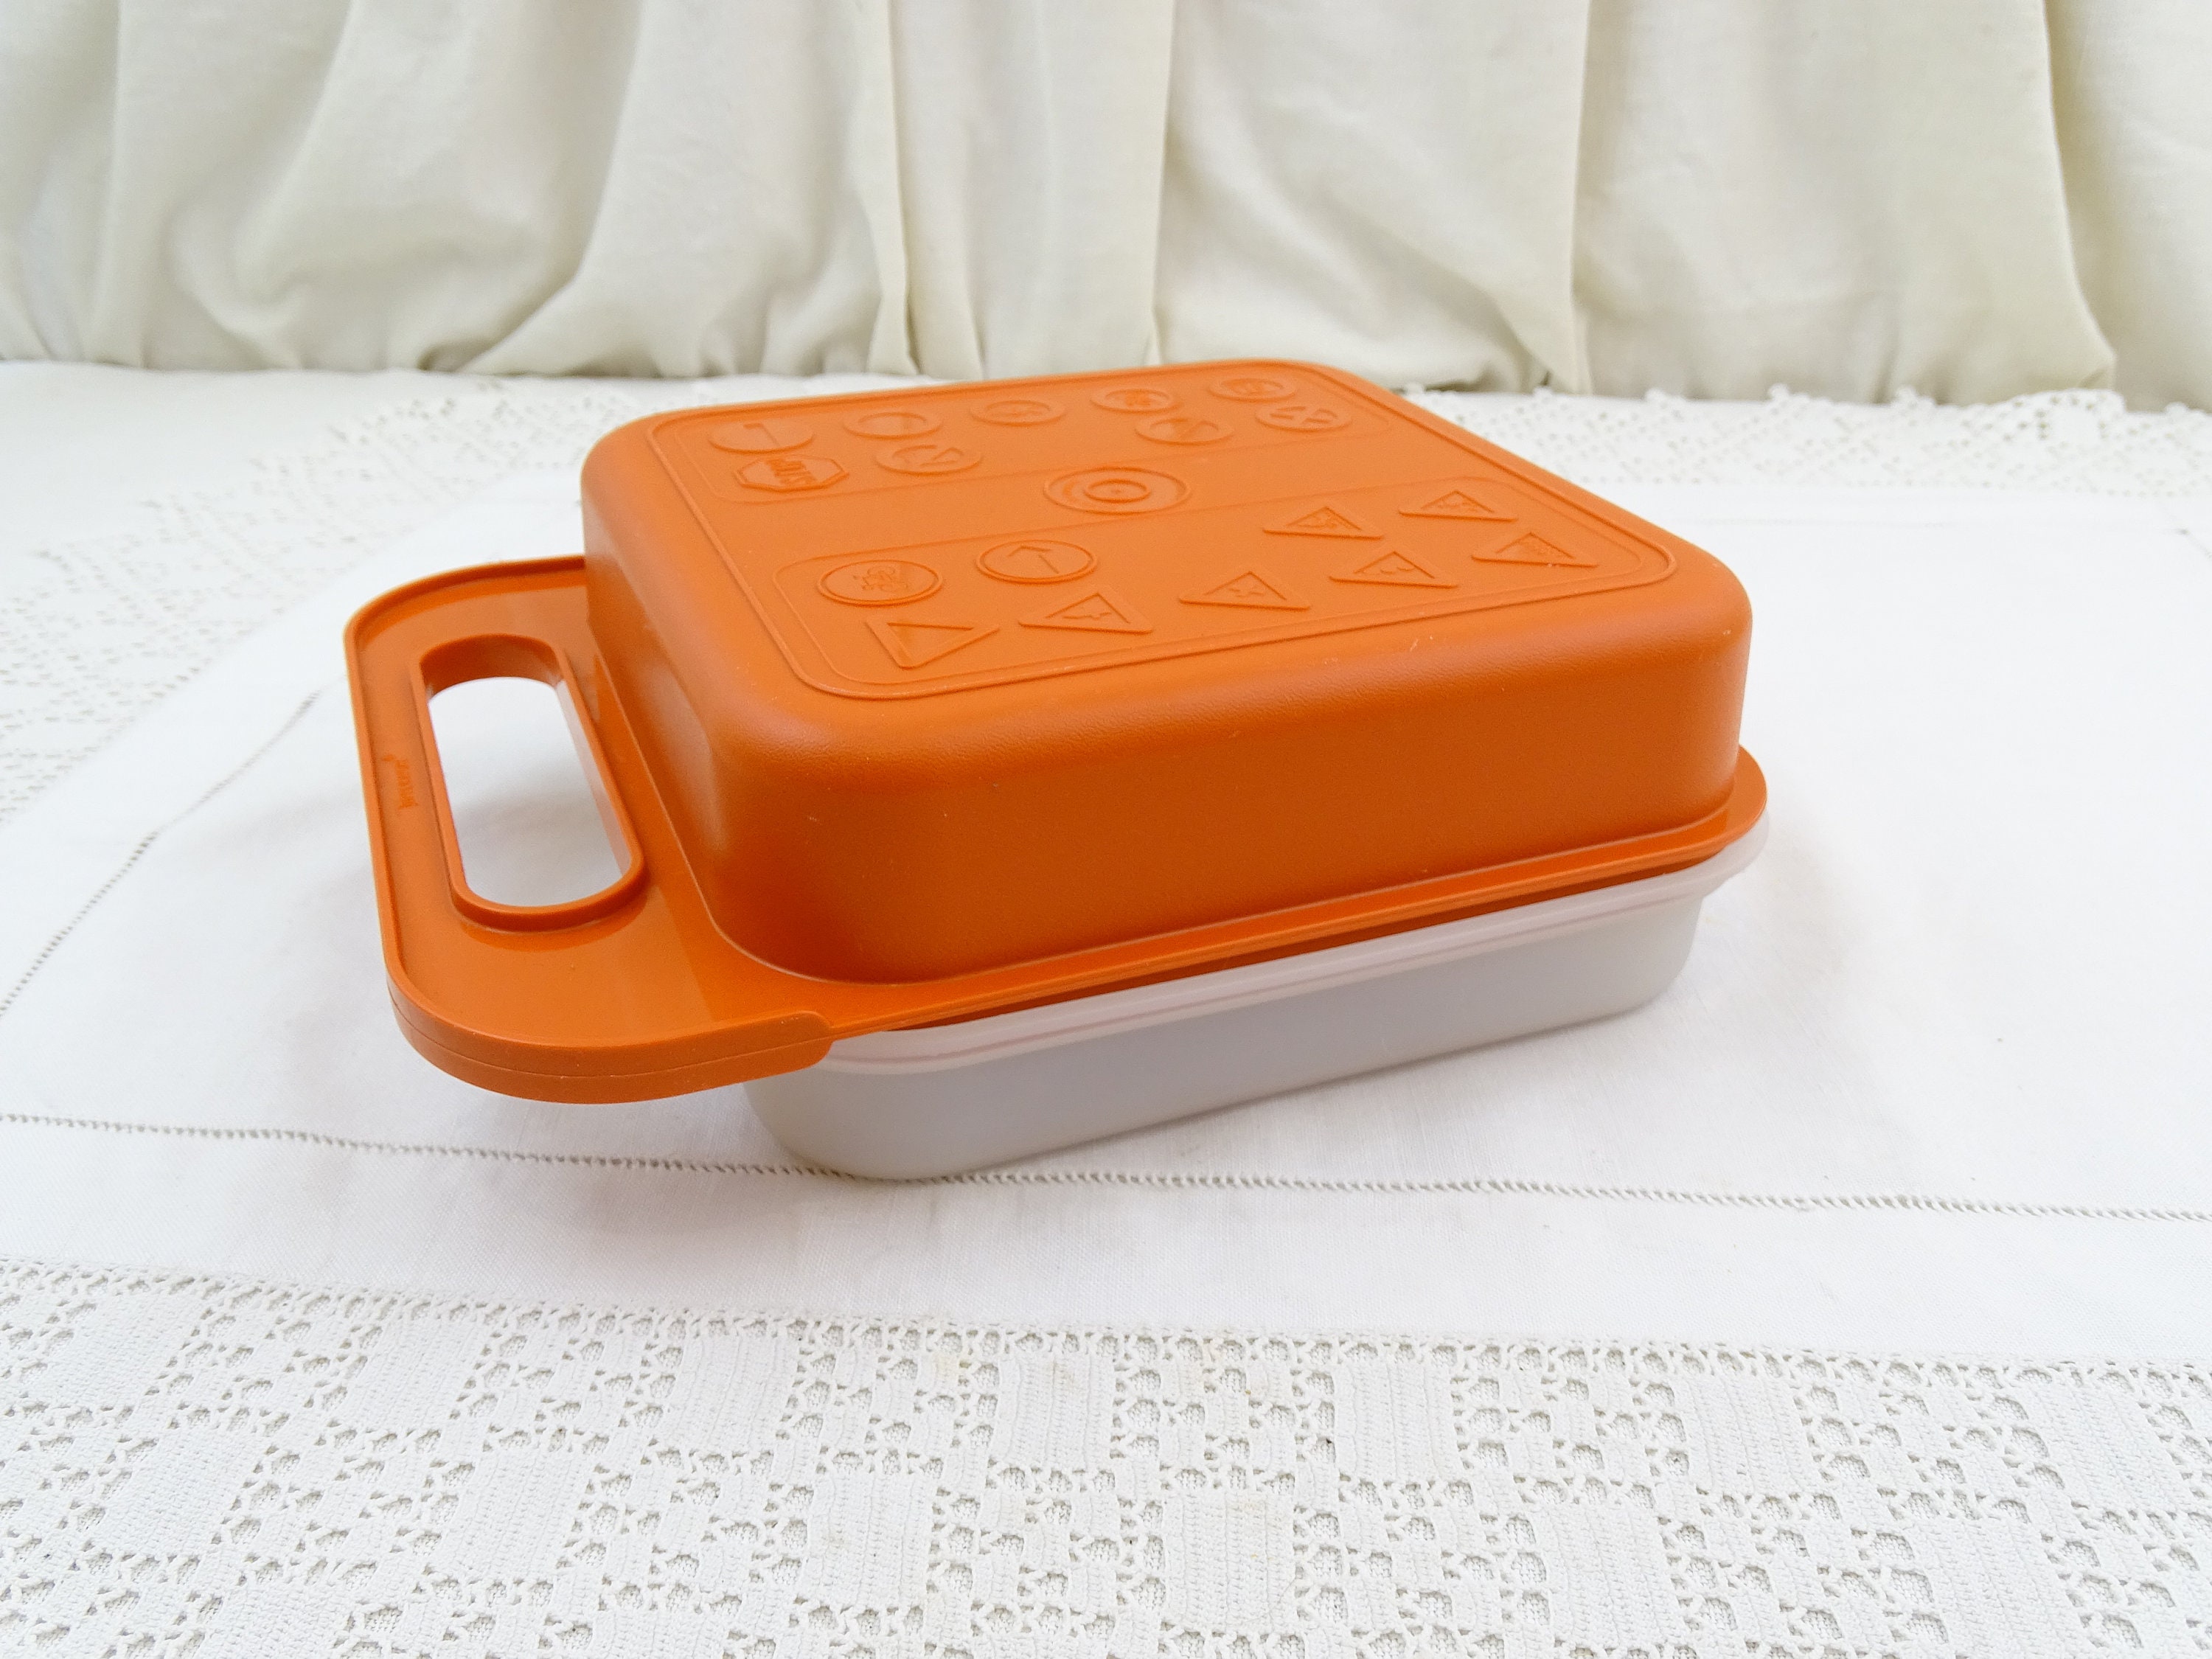 Vintage French Tupperware Bright Orange Lunch Box with Handle